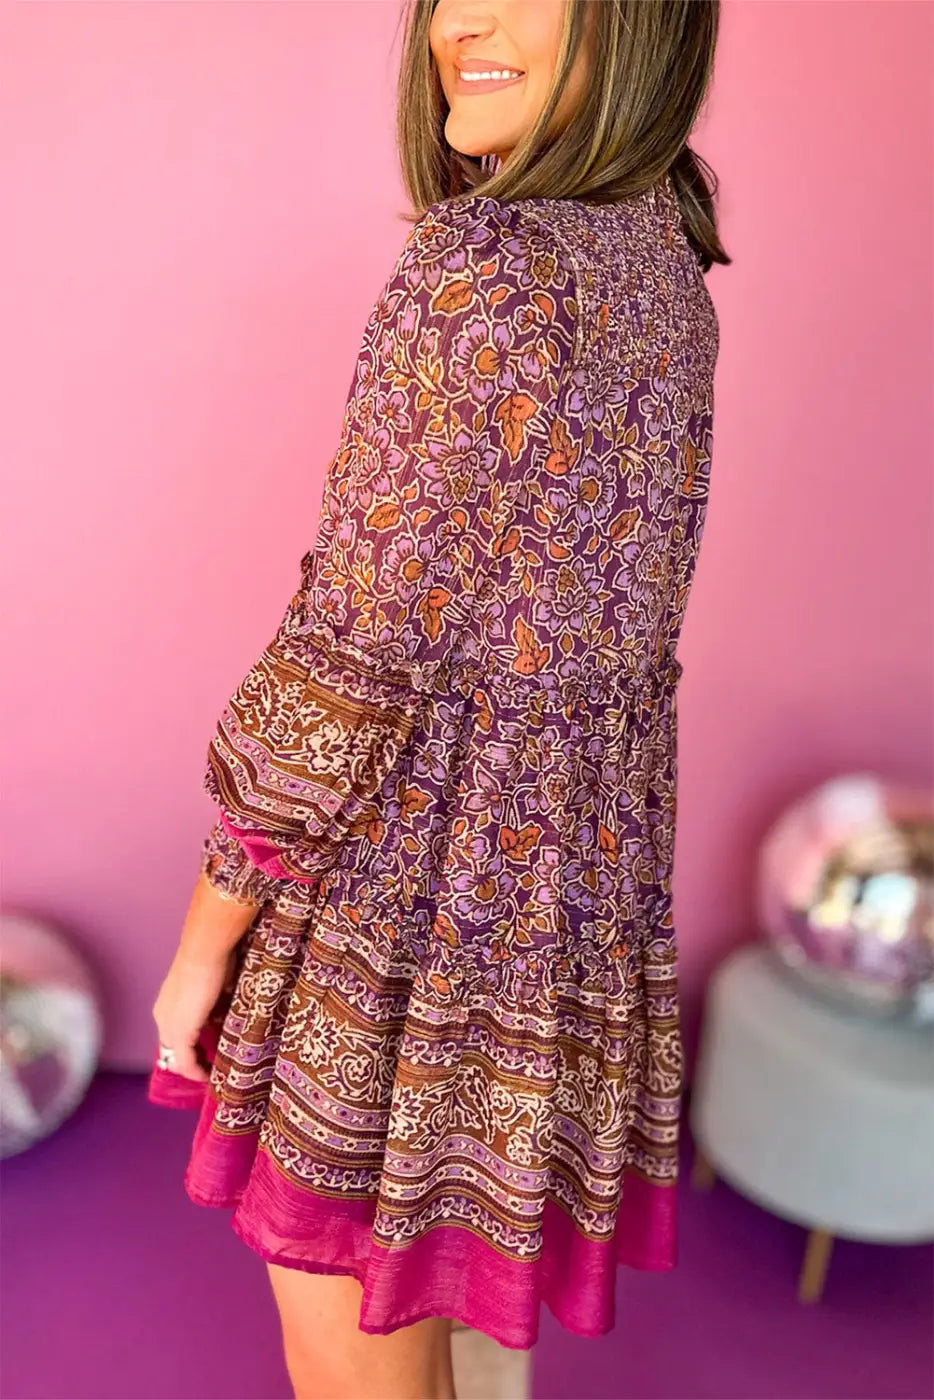 Autumn bloom mini dress: floral bohemian-style in purple, orange, and pink tones. Relax relax